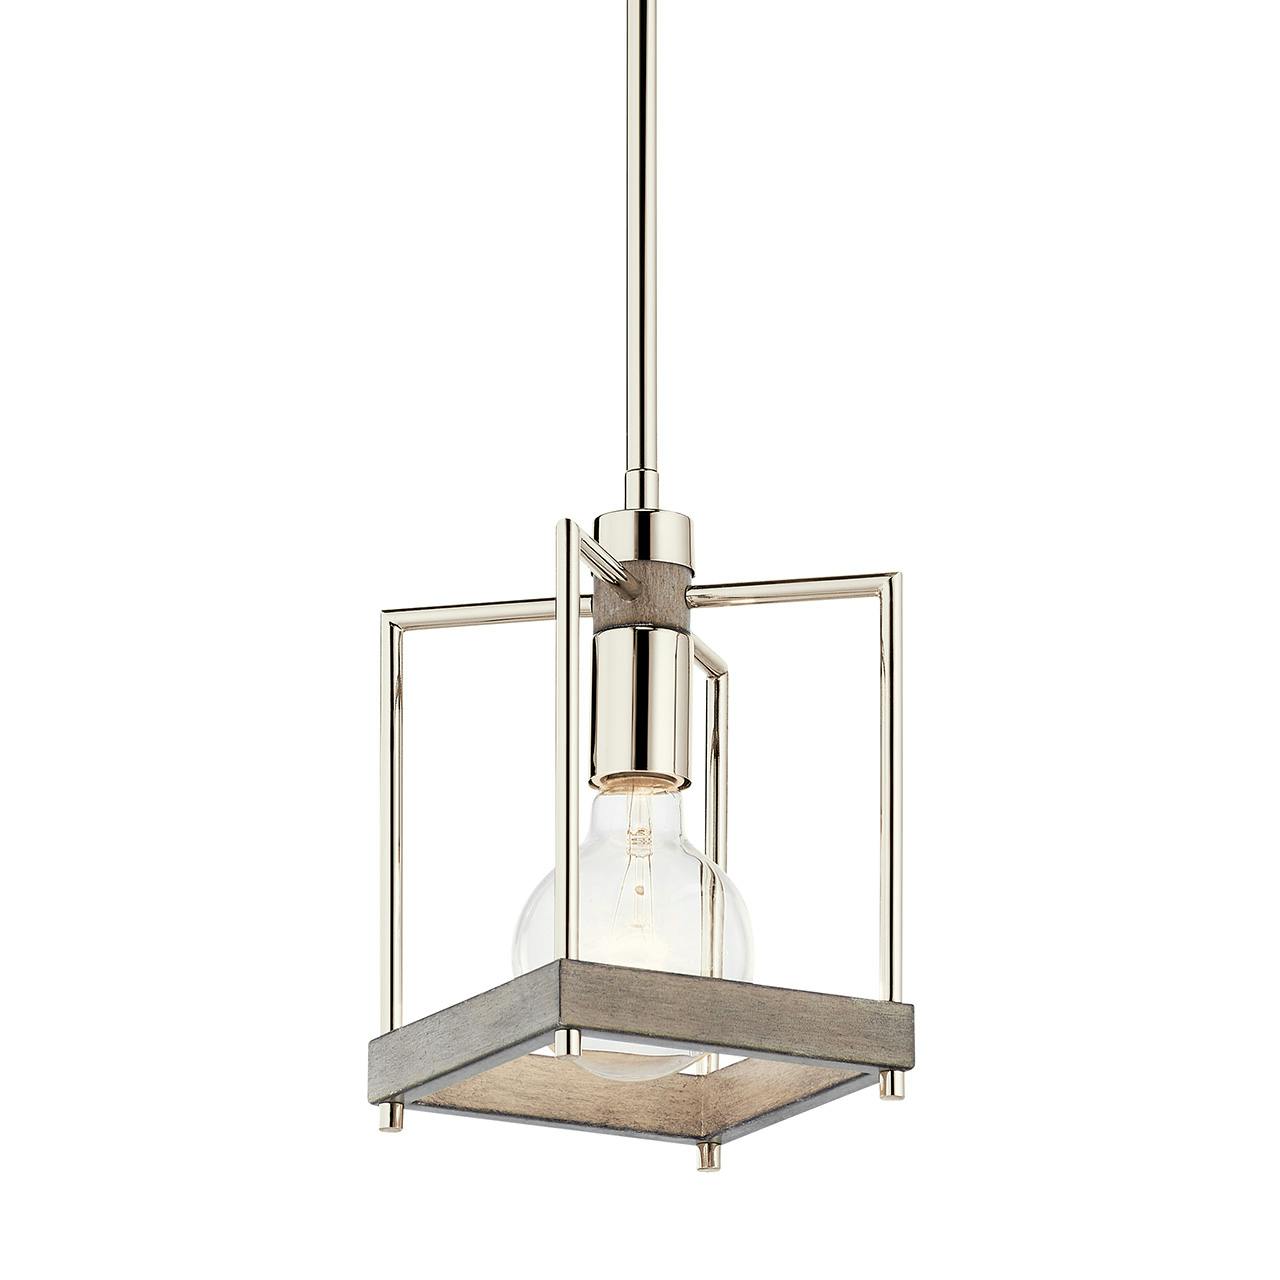 Tanis 1 Light Pendant Antique Gray without the canopy on a white background